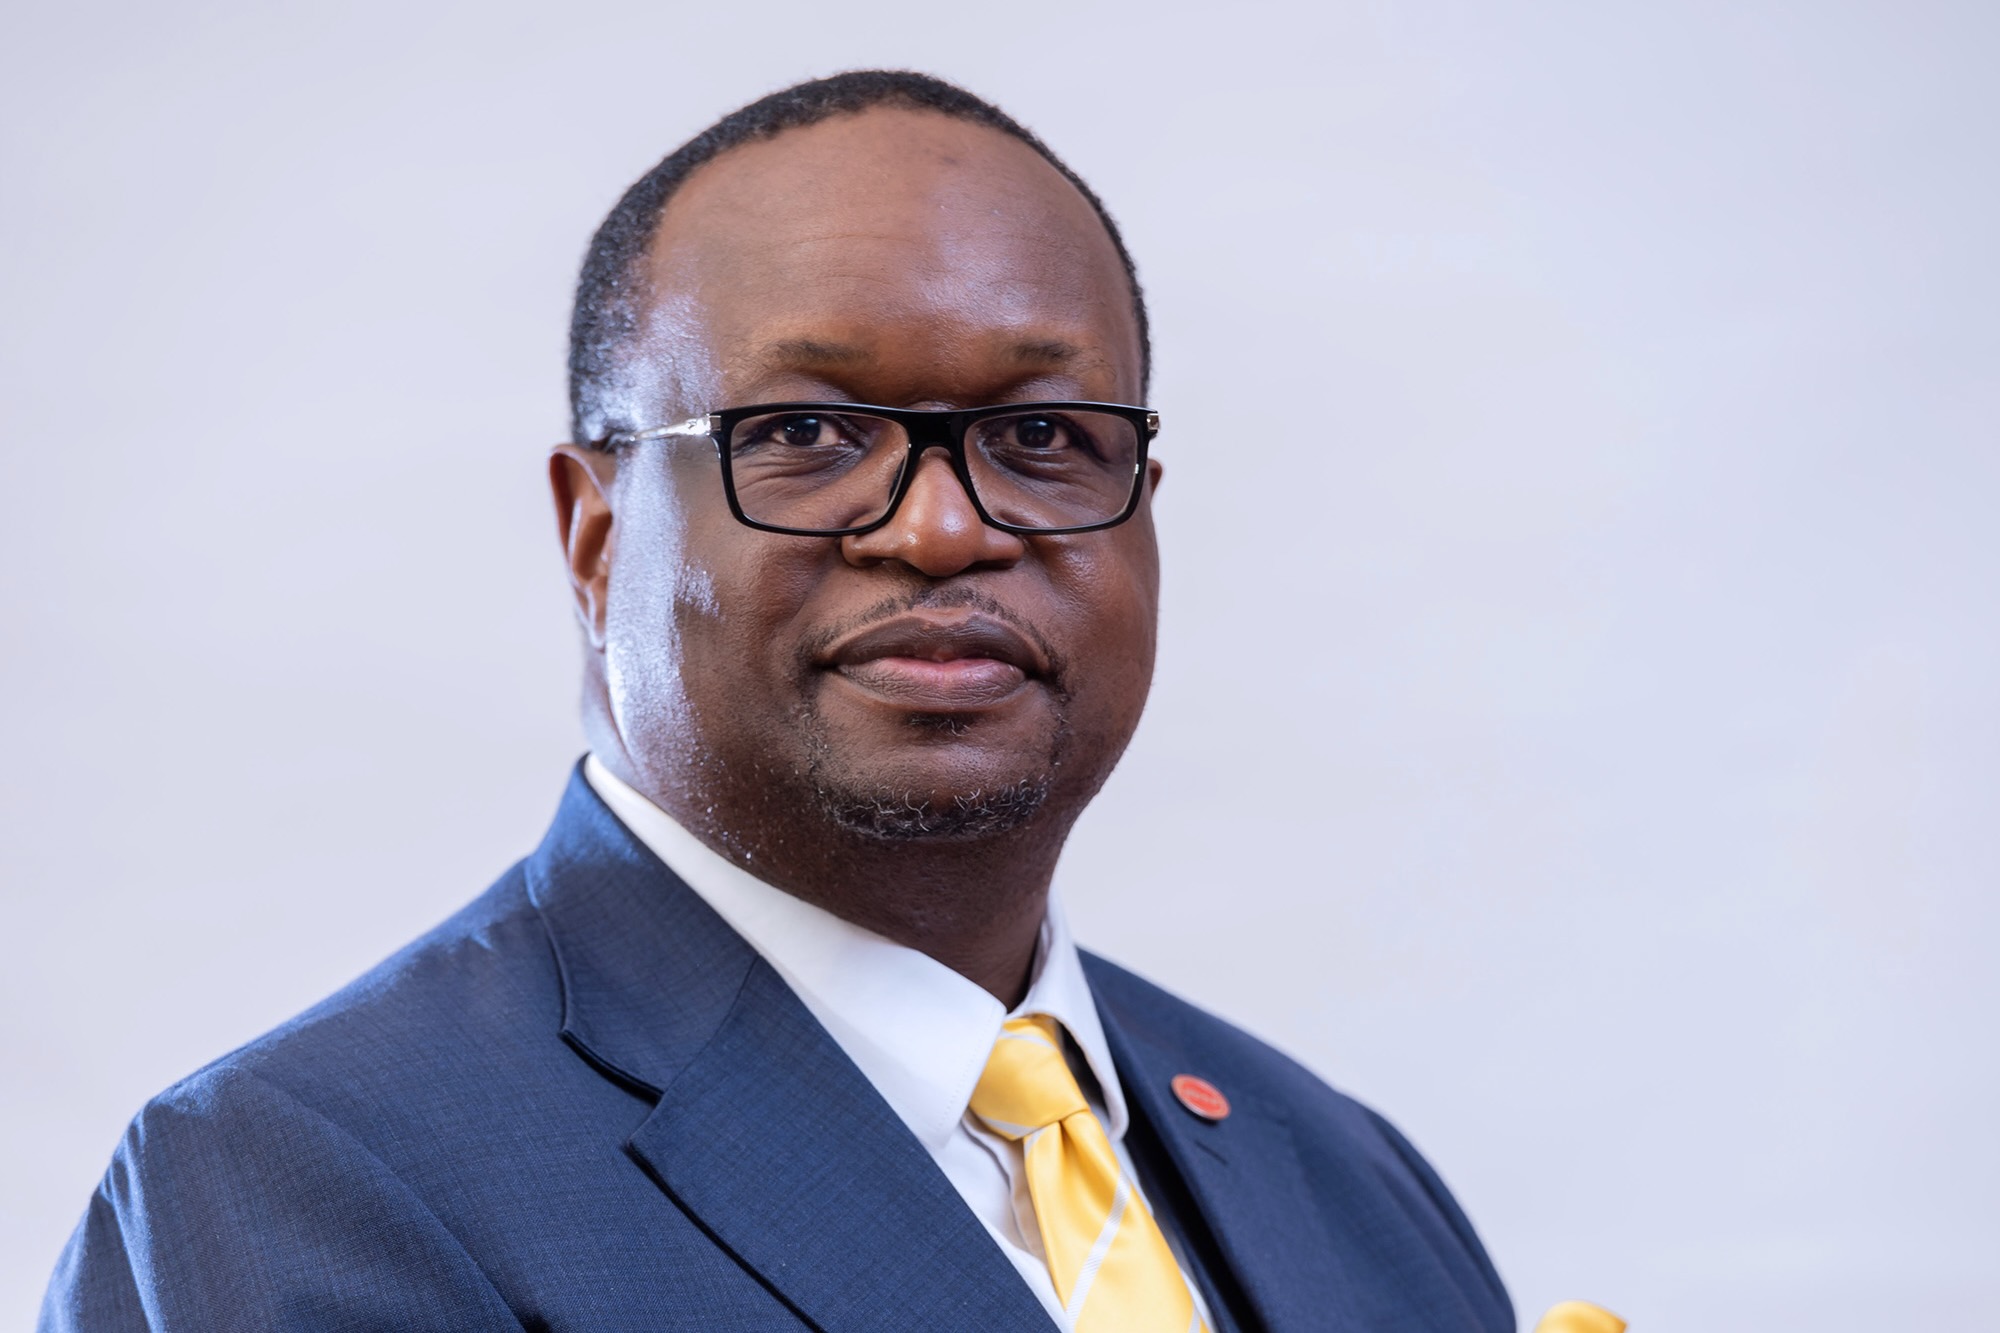 Mumba Kalifungwa, Absa Bank Uganda’s Managing Director, since April 2020. Over and above steering the bank through the pandemic, he has been able to, through these three years, grow the bank’s deposits base, by a CAGR of 4%, lending by a CAGR of 5.5% and total assets by a CAGR of 7.3%.